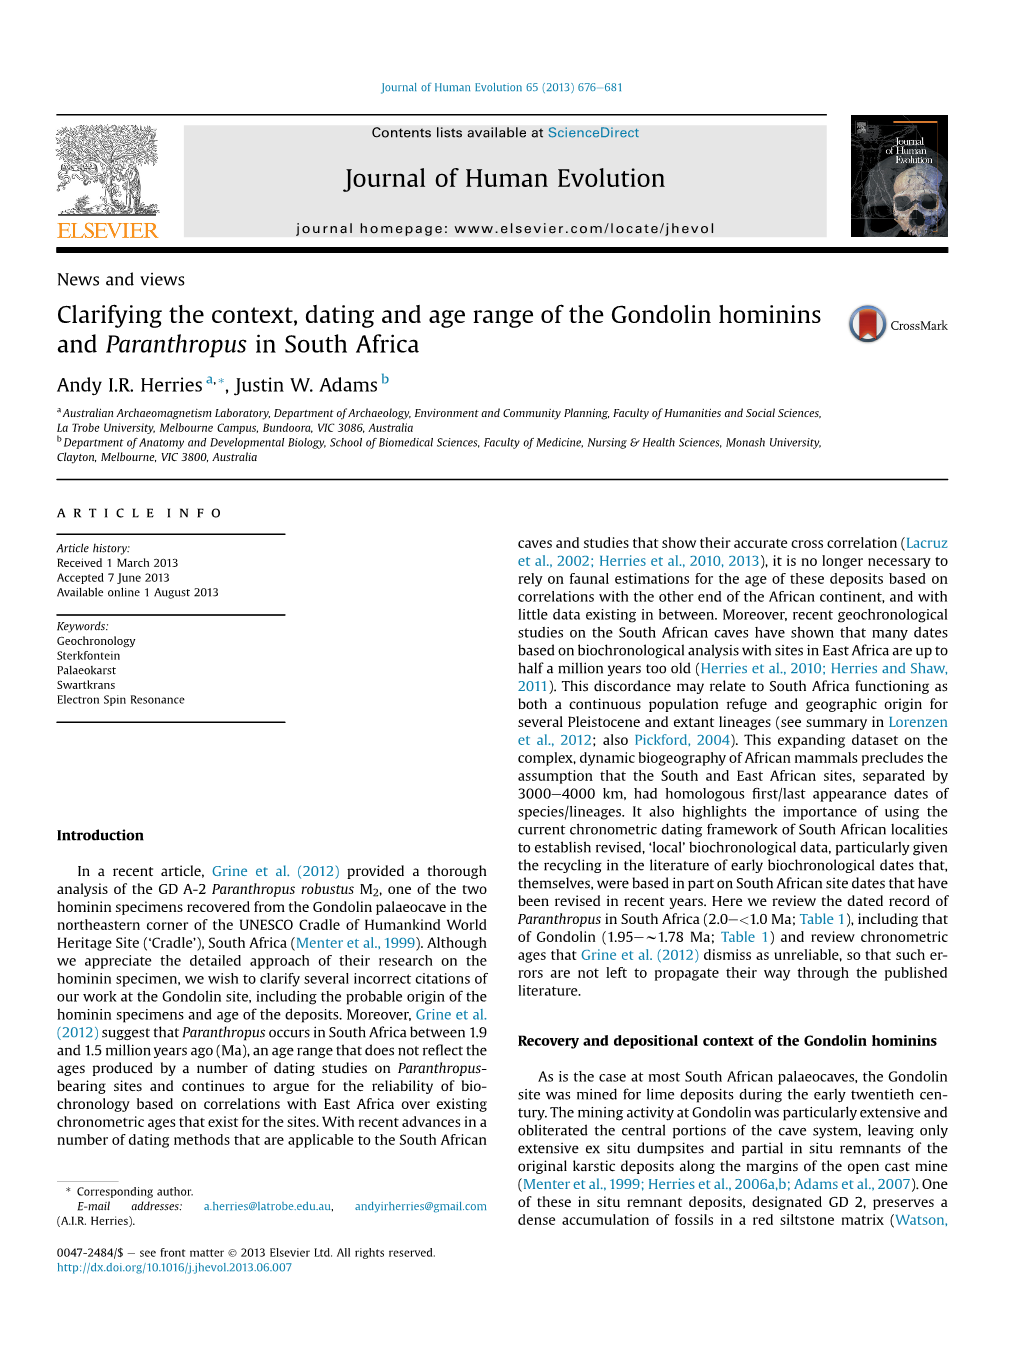 Clarifying the Context, Dating and Age Range of the Gondolin Hominins and Paranthropus in South Africa